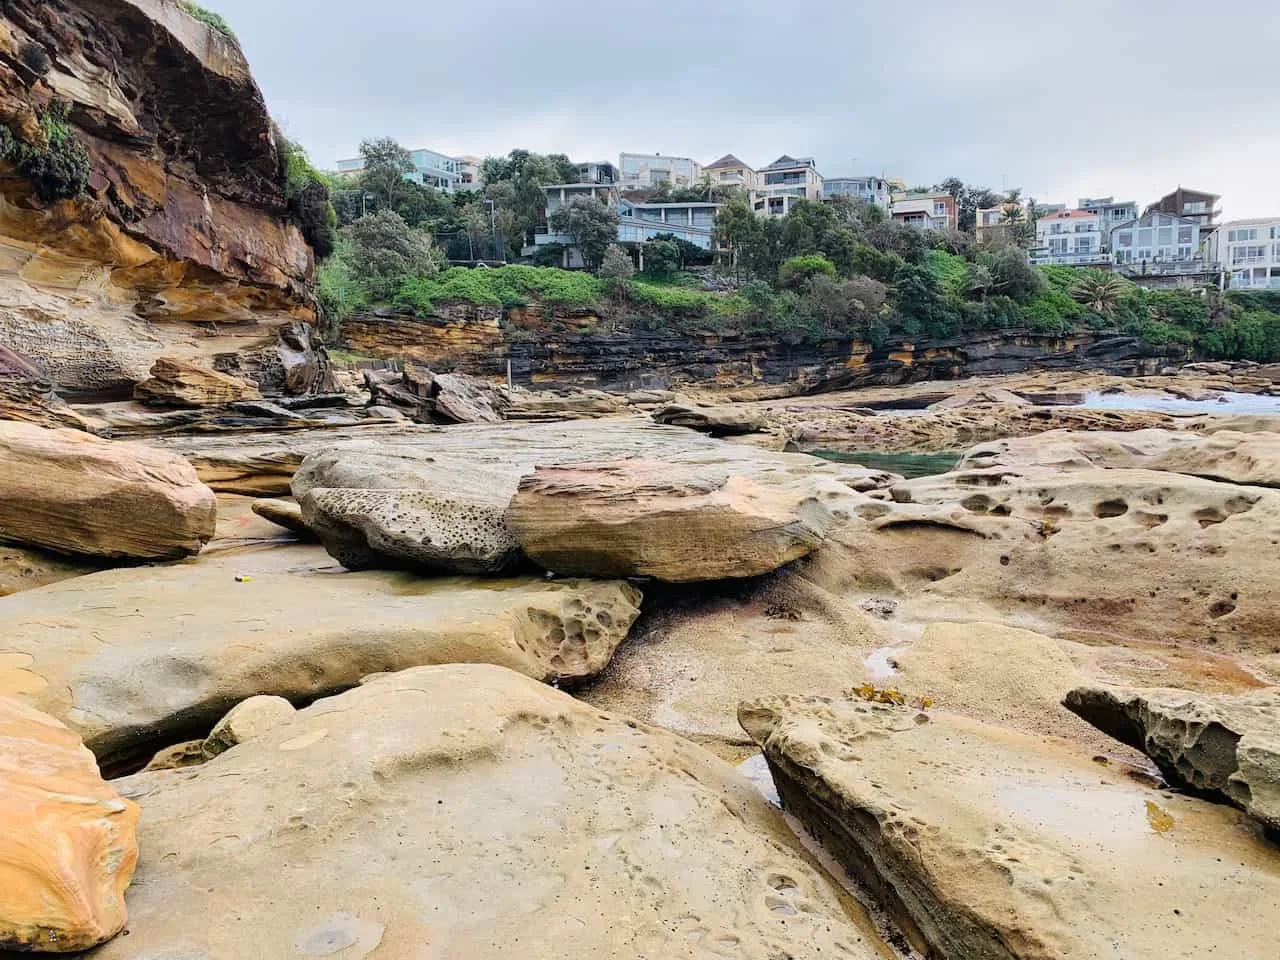 Maroubra to Coogee Rock Path